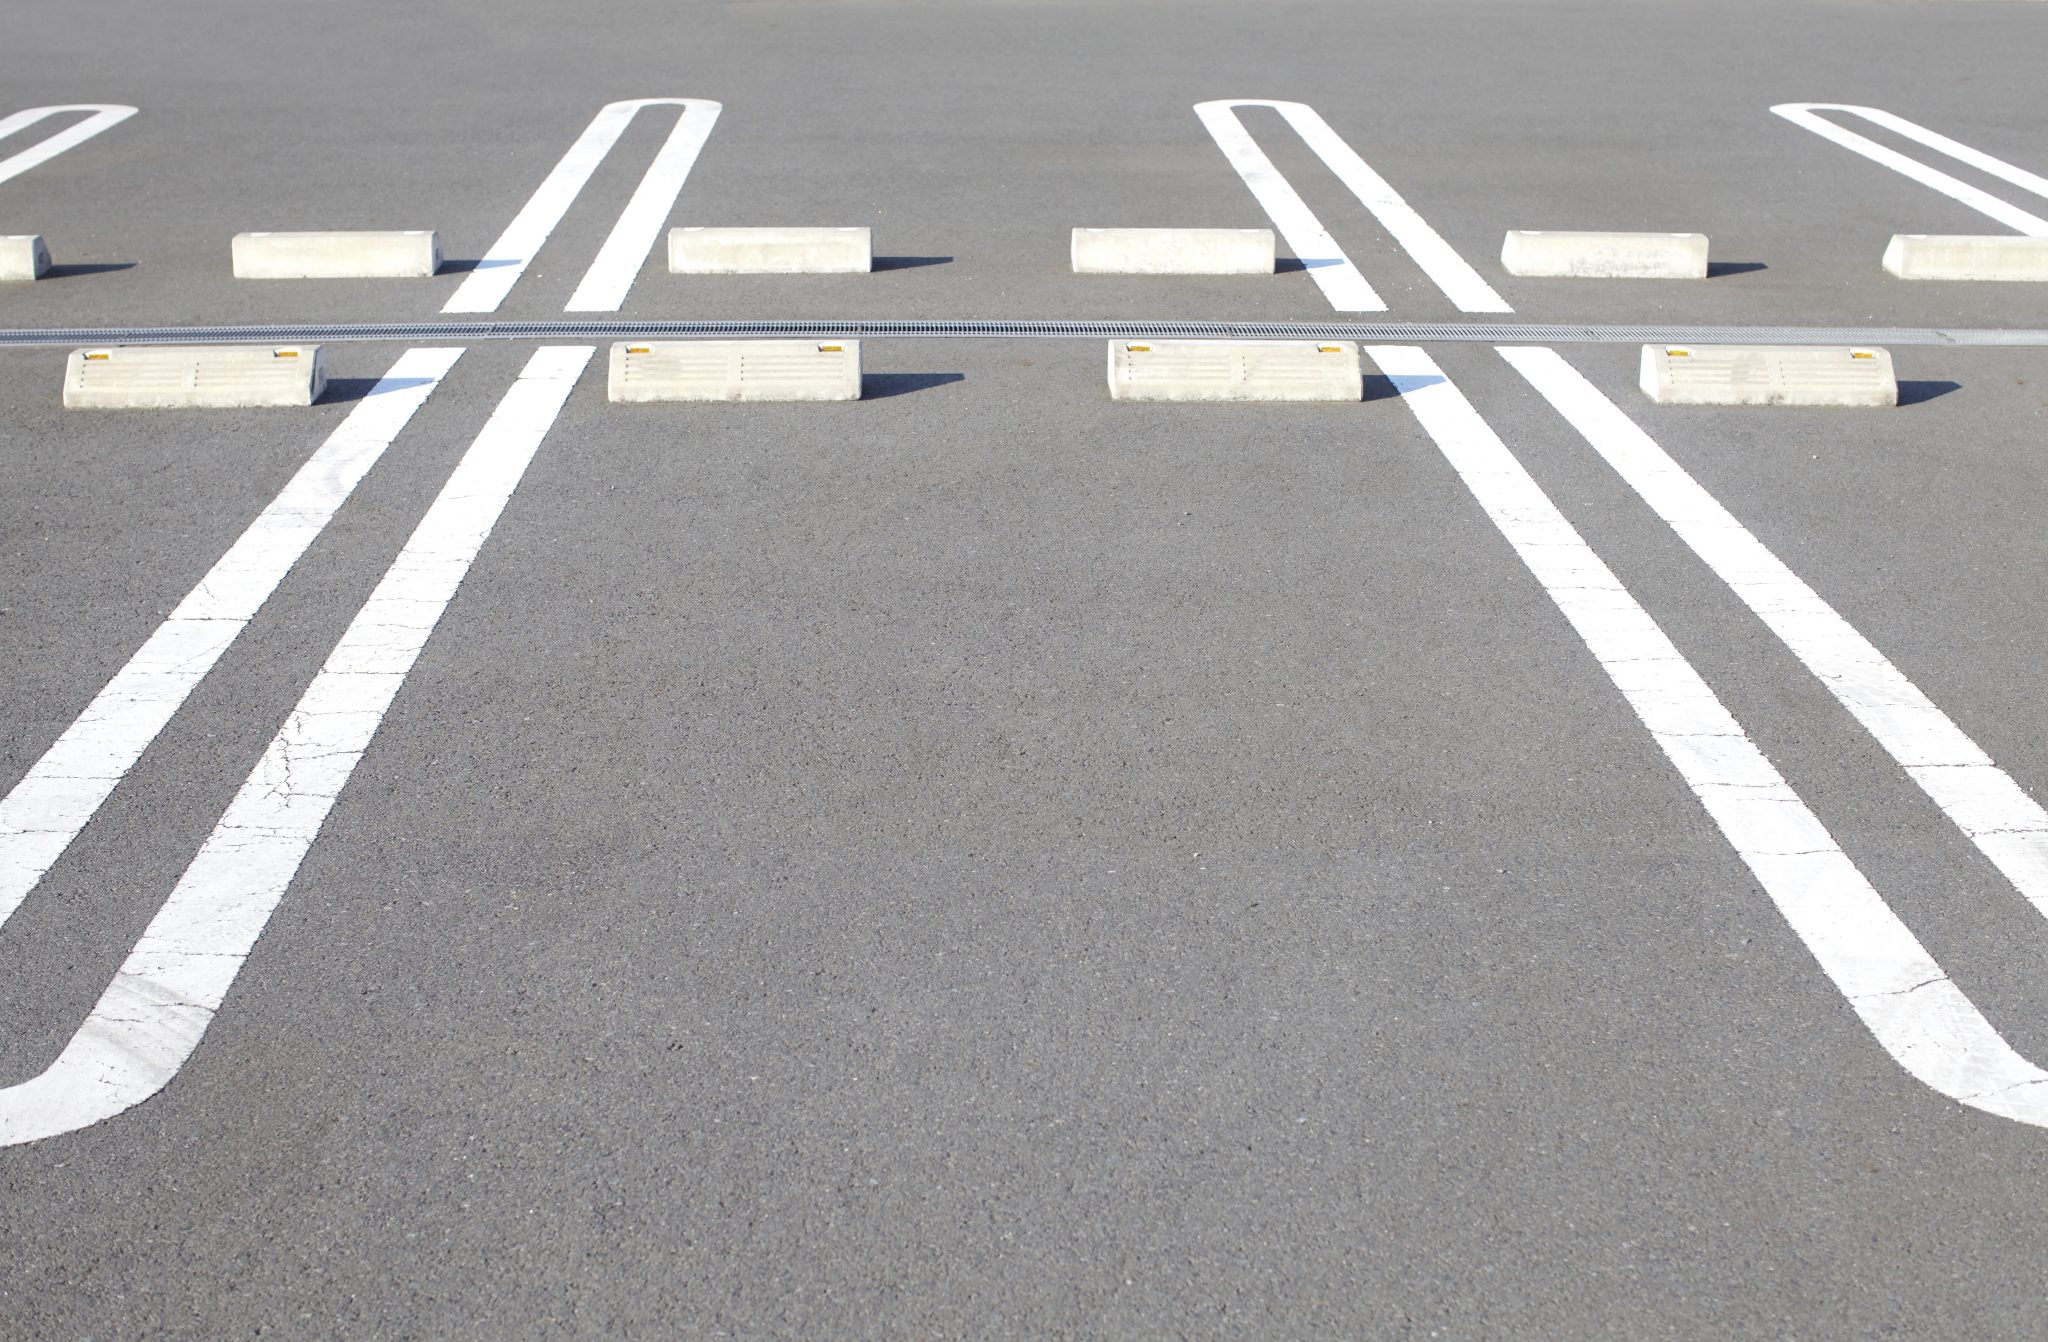 4 Elements of Parking Lot Design That Must Be Prioritized